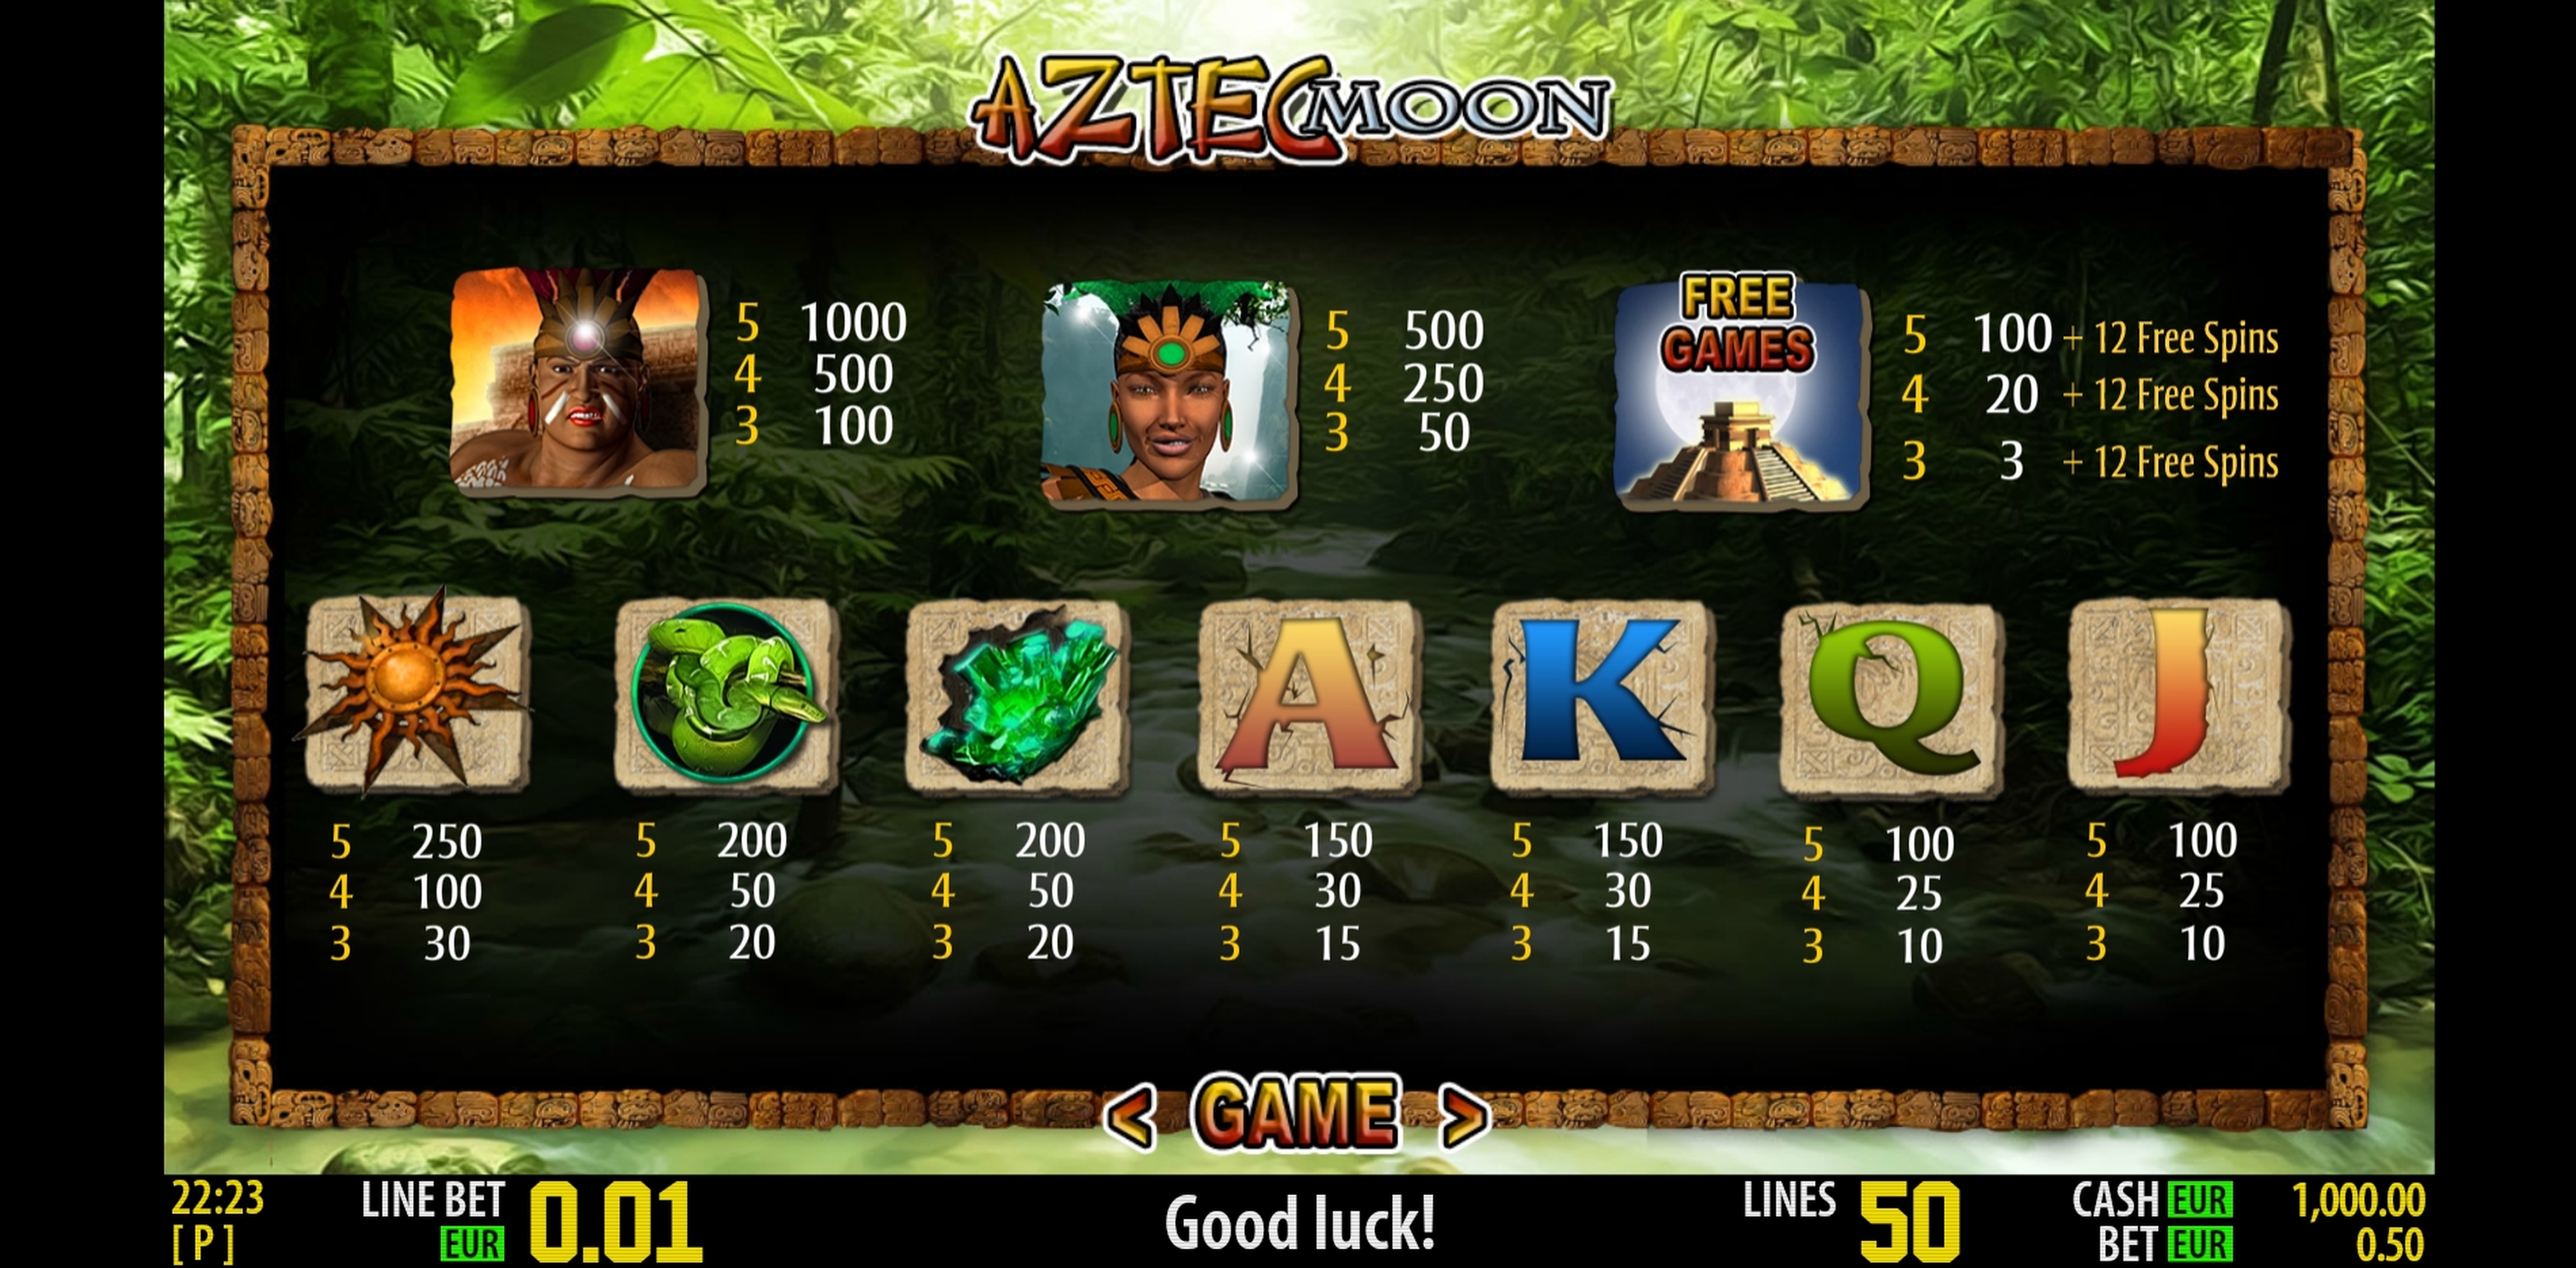 Info of Aztec Moon Slot Game by Magic Dreams